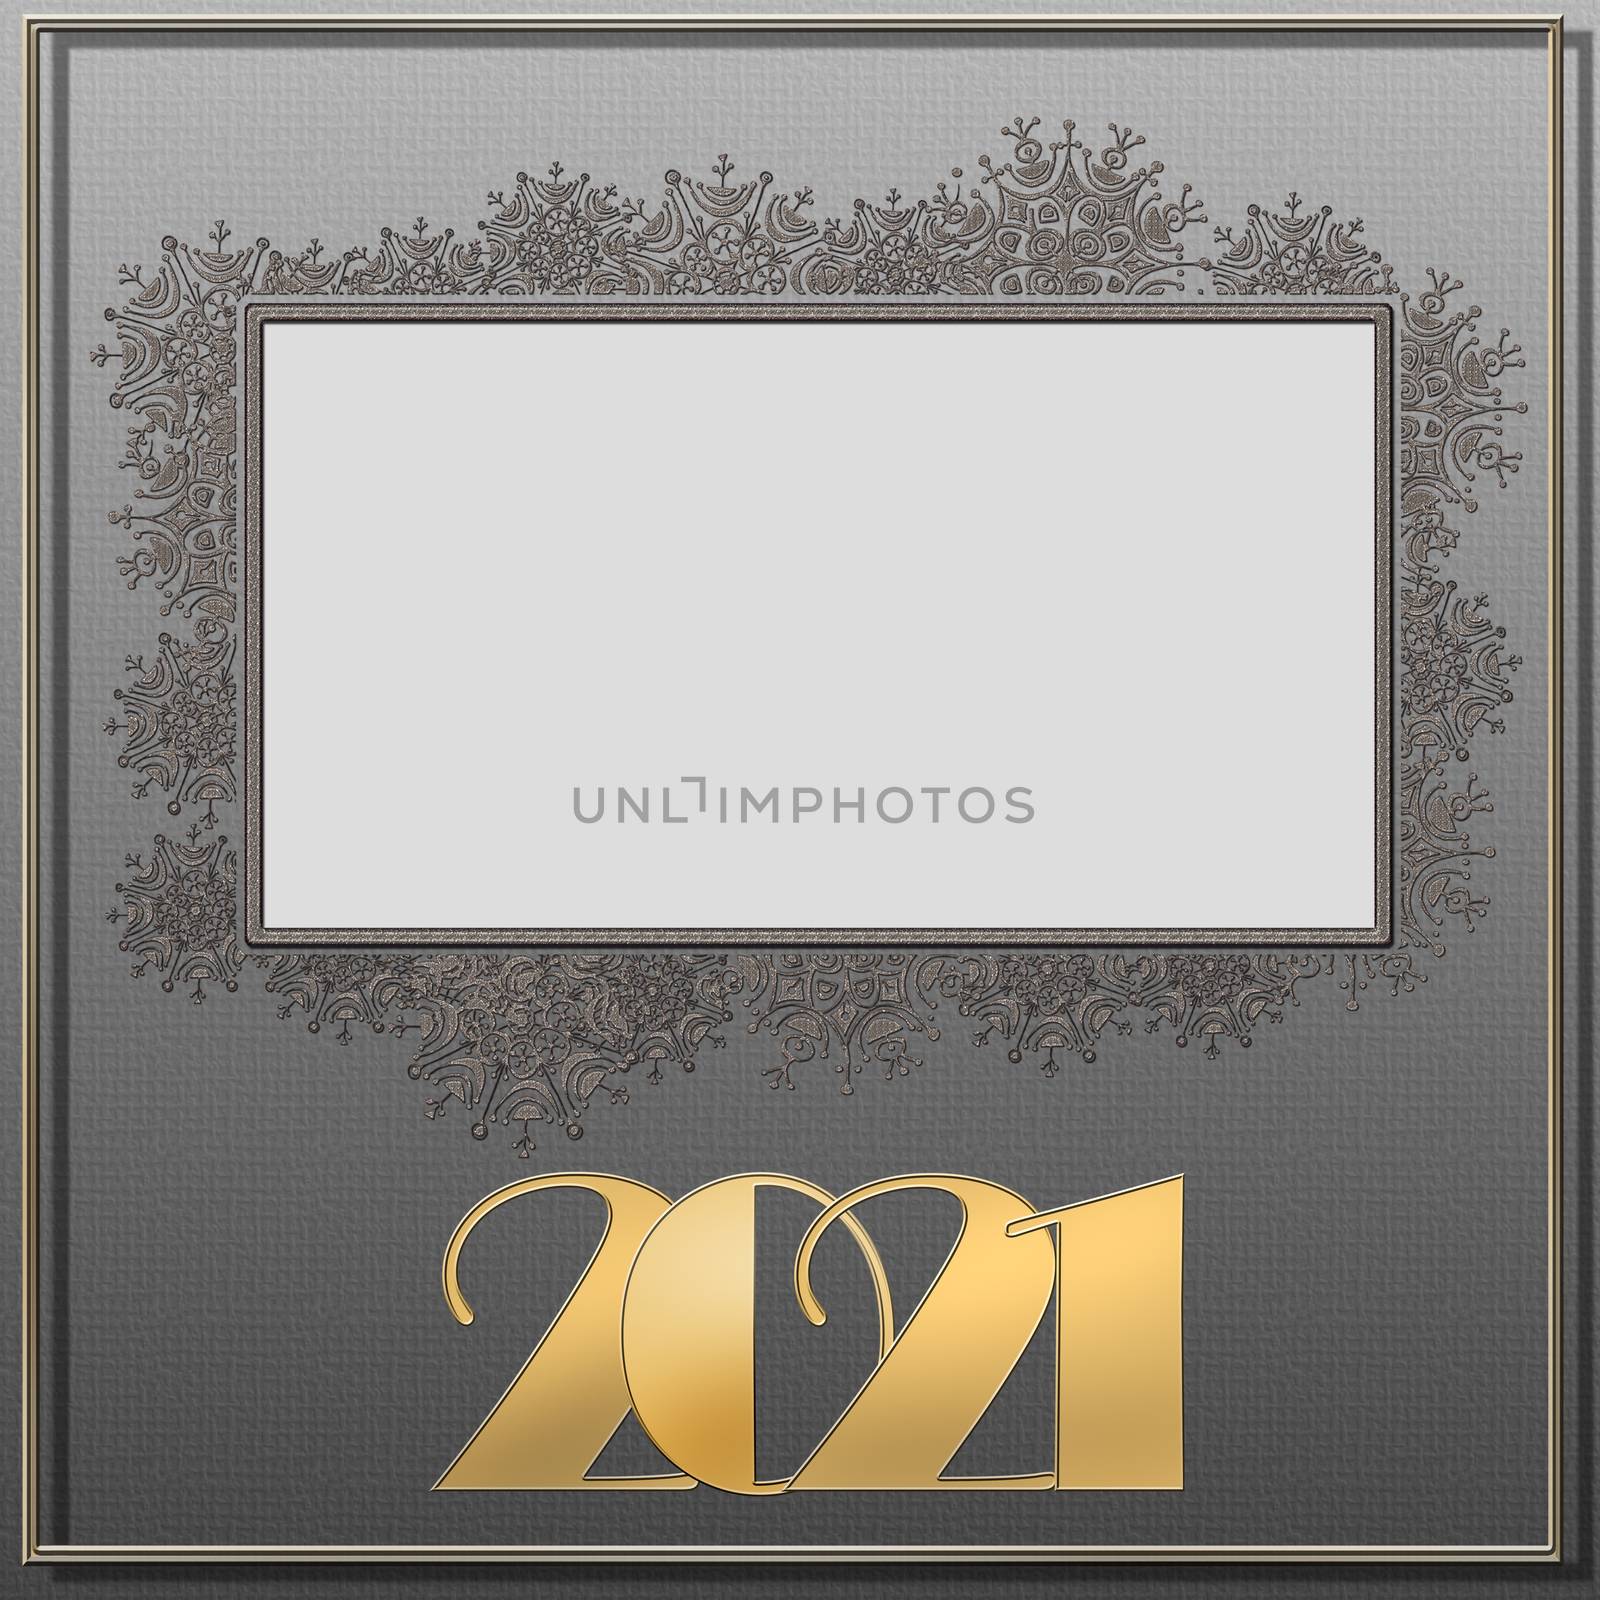 Classy 2021 Happy New Year background. Gold number 2021 on grey background with snowflakes border. Holiday flyer, greeting and invitation card, christmas banner. New Year selebration. 3D illustration.